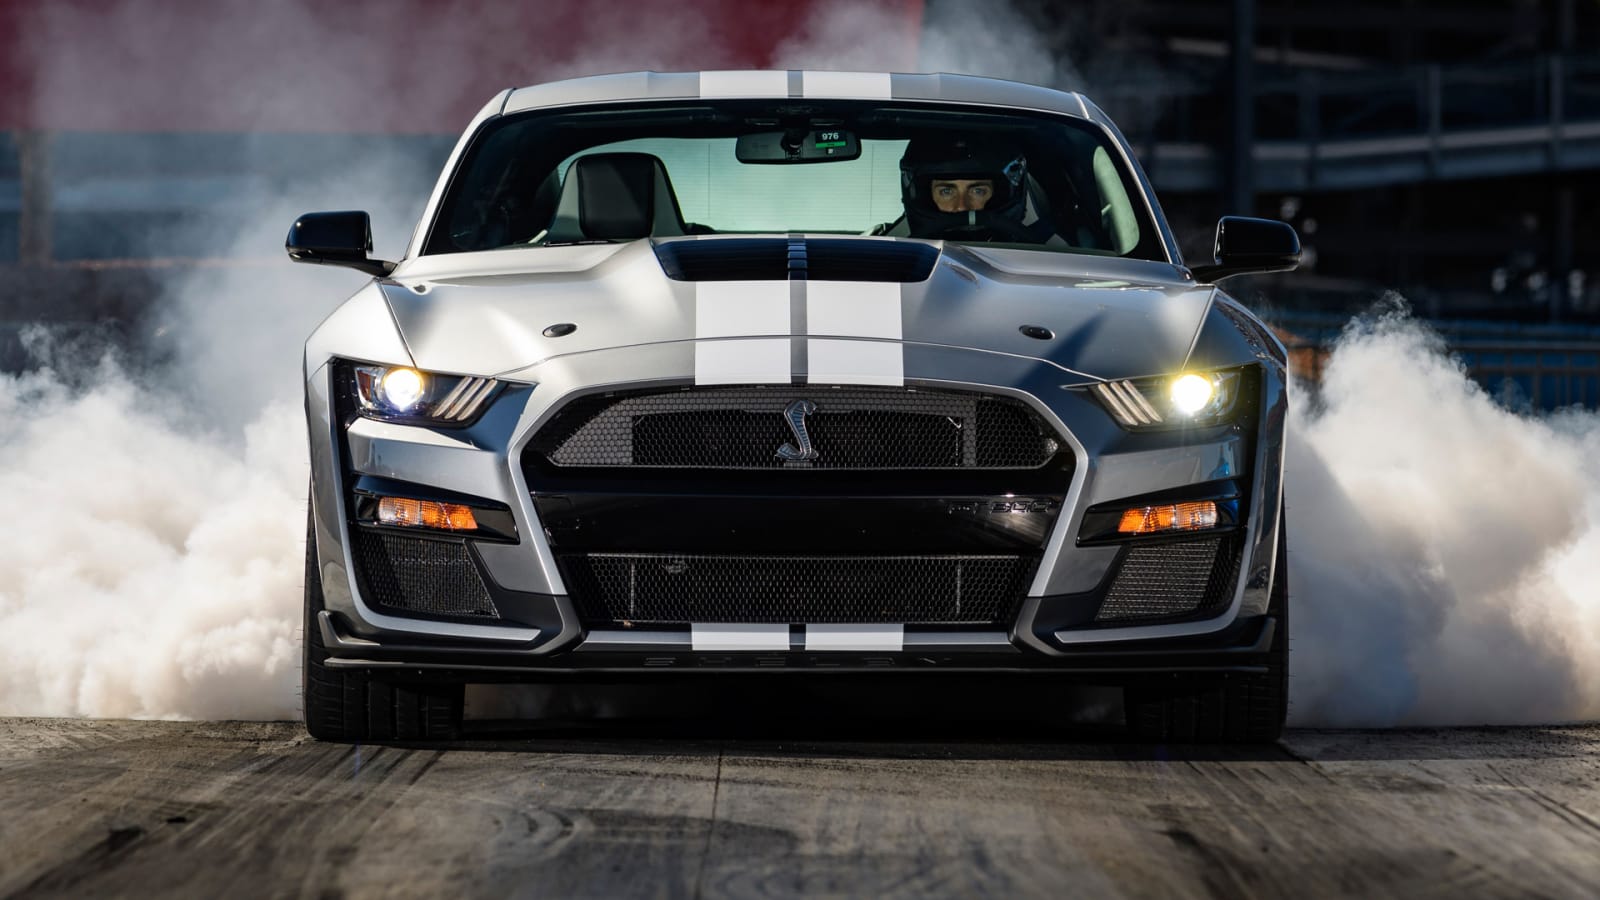 2020 Ford Mustang Shelby GT500 First Drive Review | What's new, performance, Corvette comparison | Autoblog